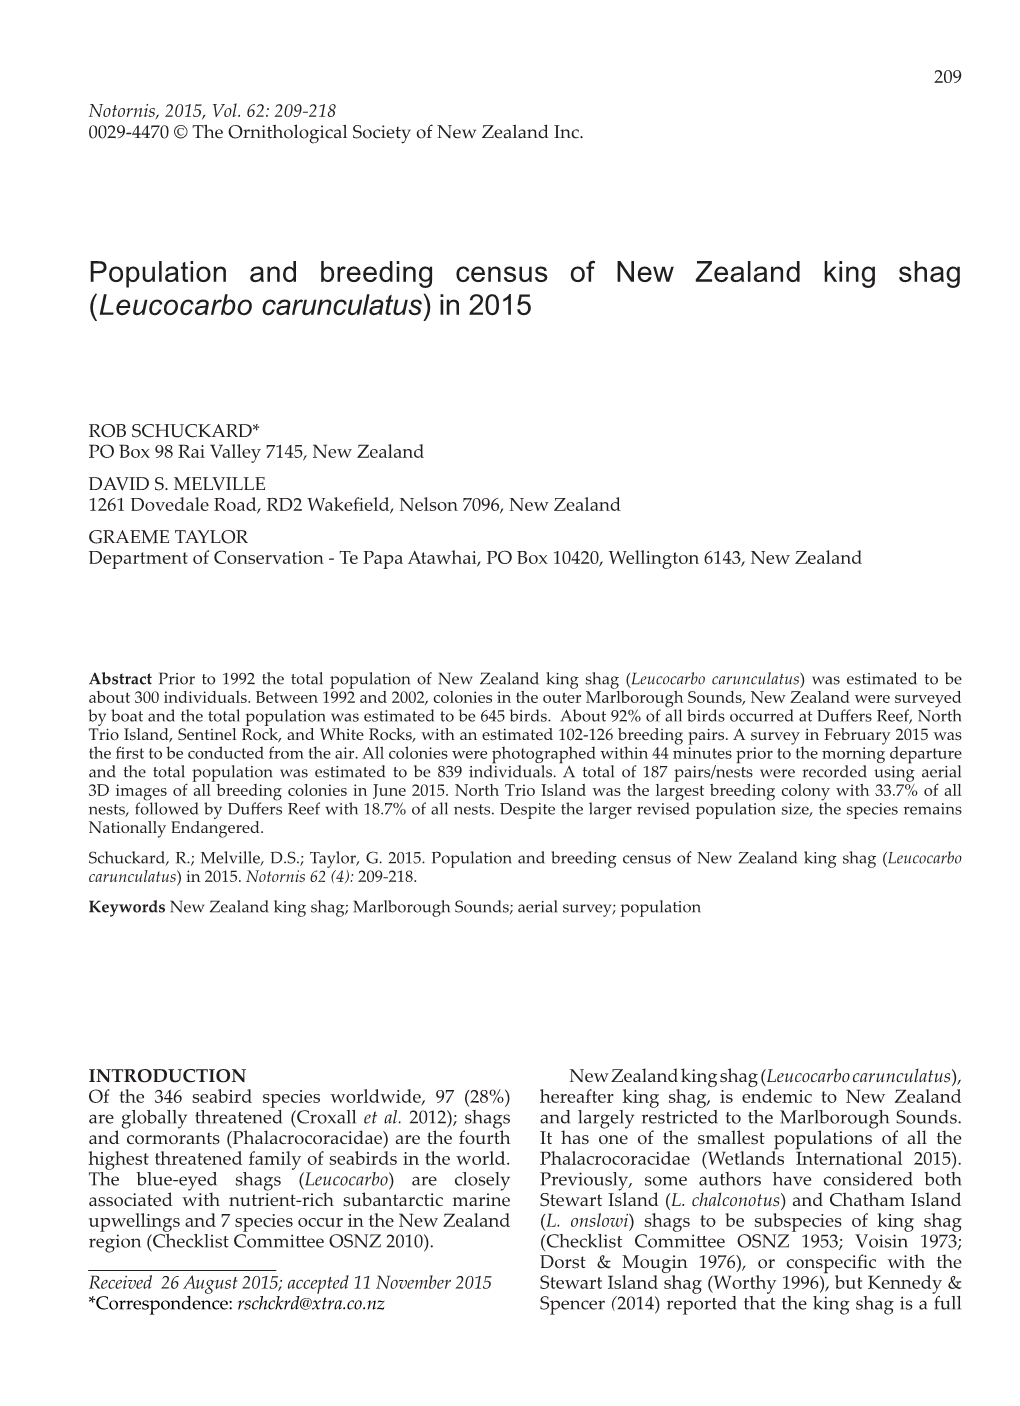 Population and Breeding Census of New Zealand King Shag (Leucocarbo Carunculatus) in 2015